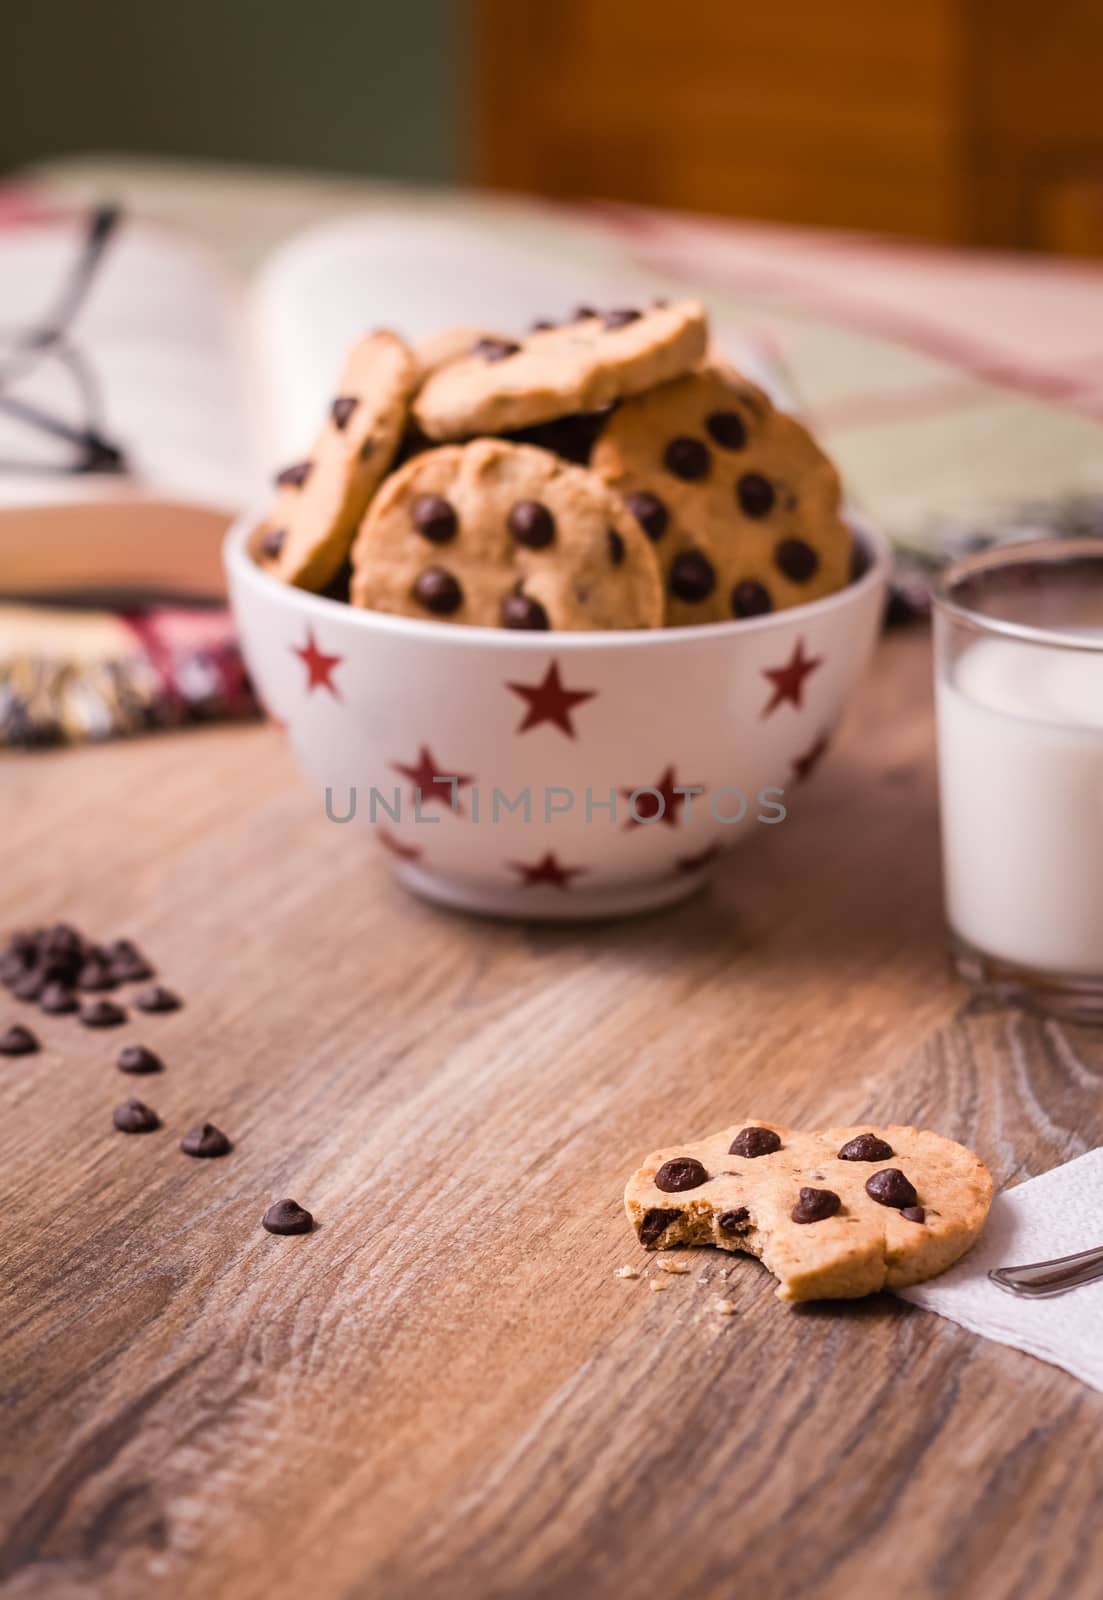 Closeup of chocolate chip cookies on stars bowl and milk glass over a wooden background. Image focused in cookie bite